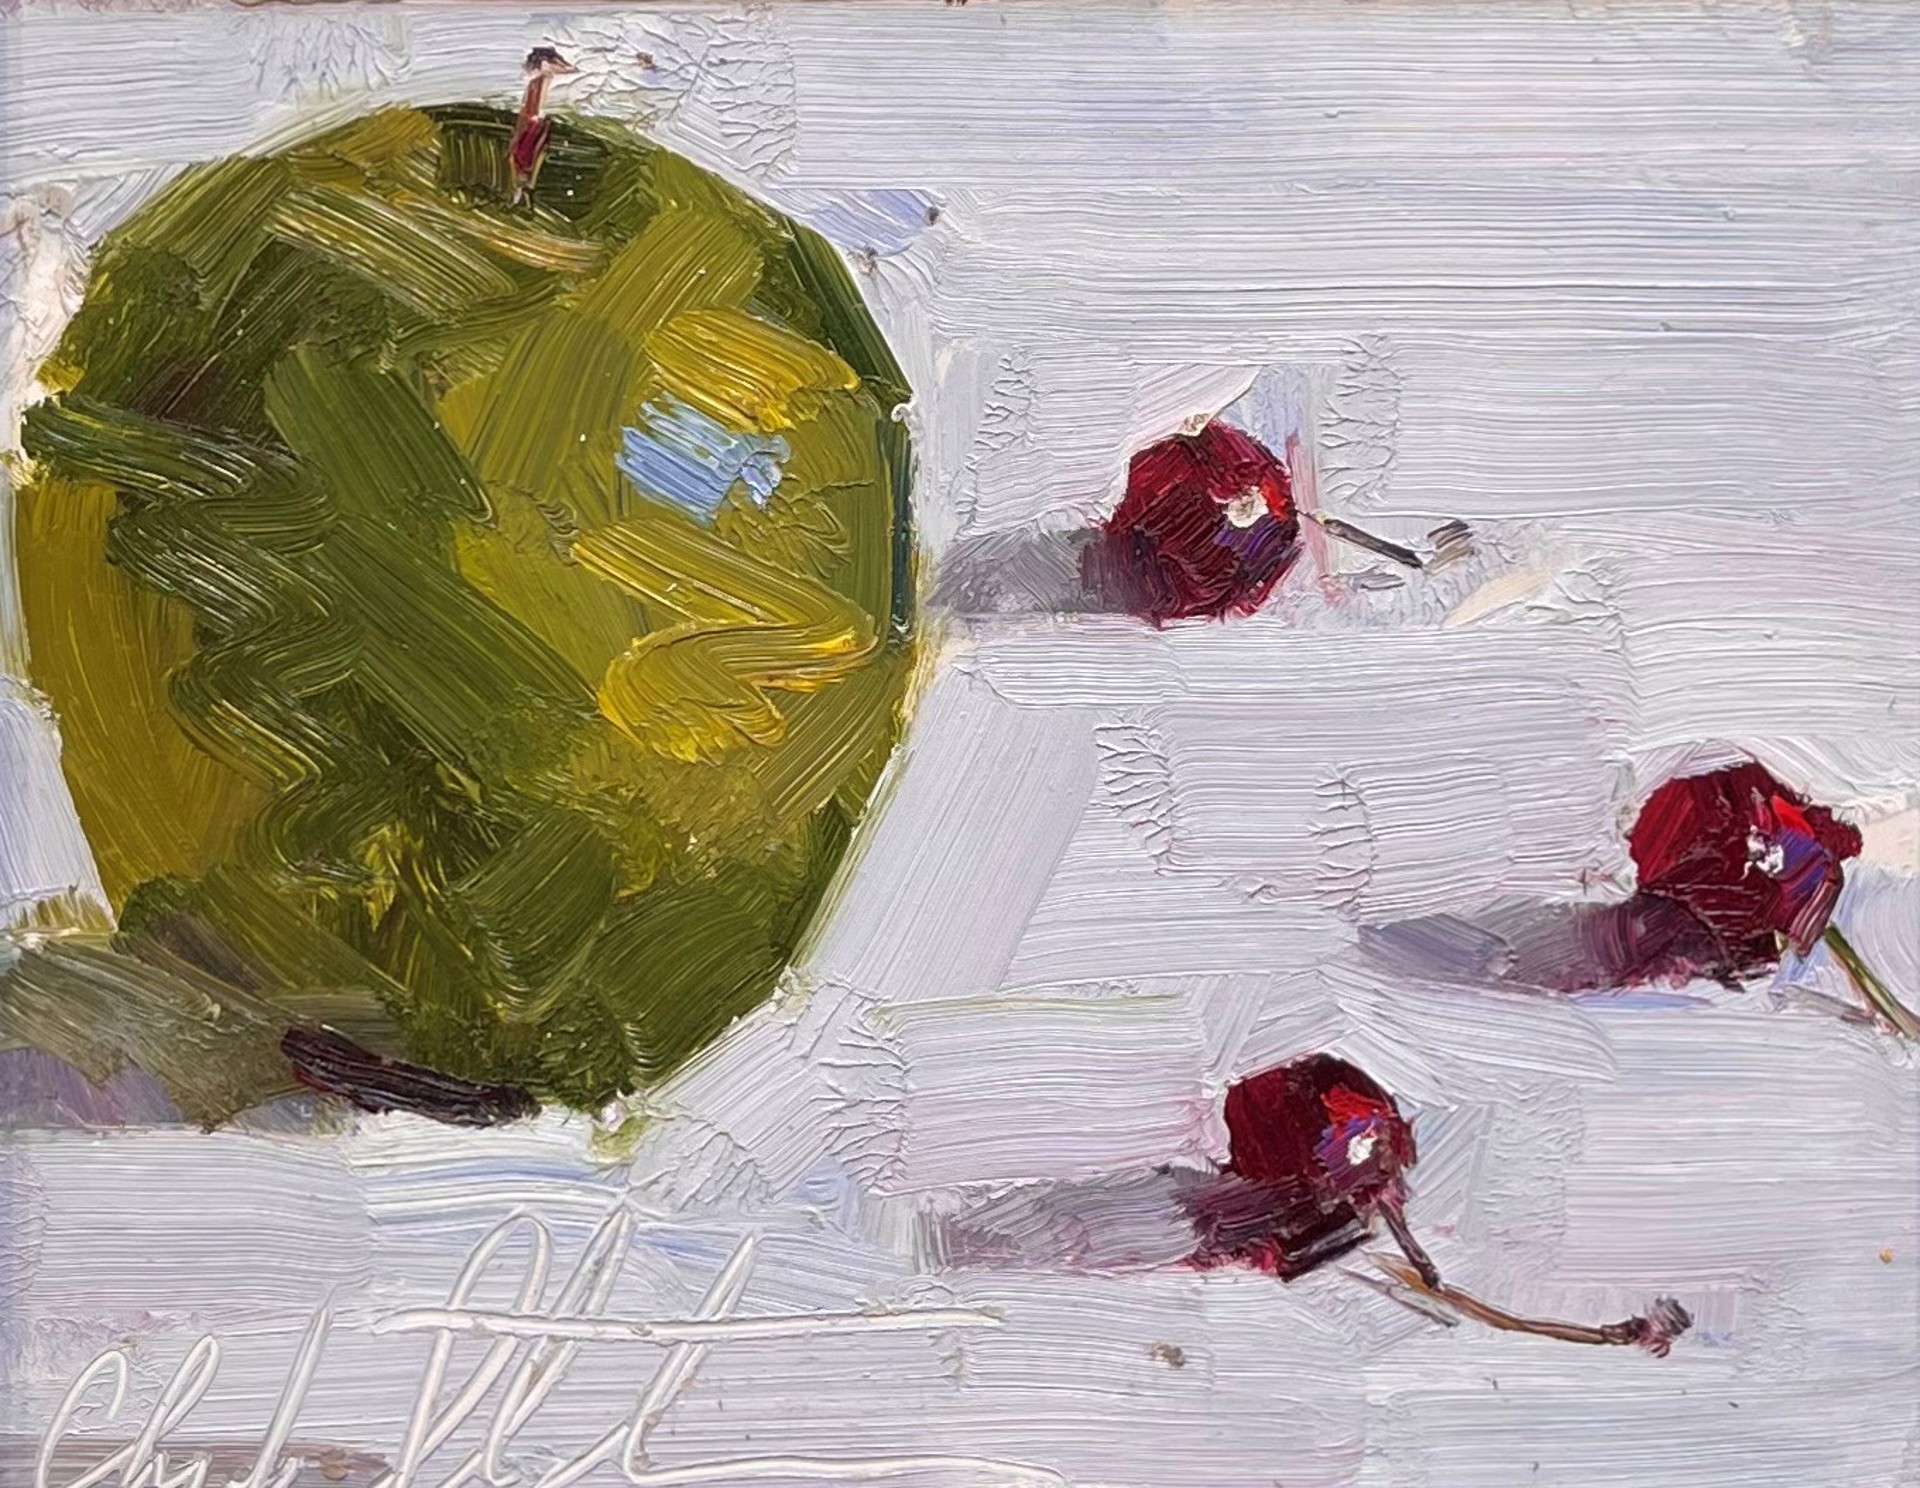 Apples and Cherries by Clyde Steadman